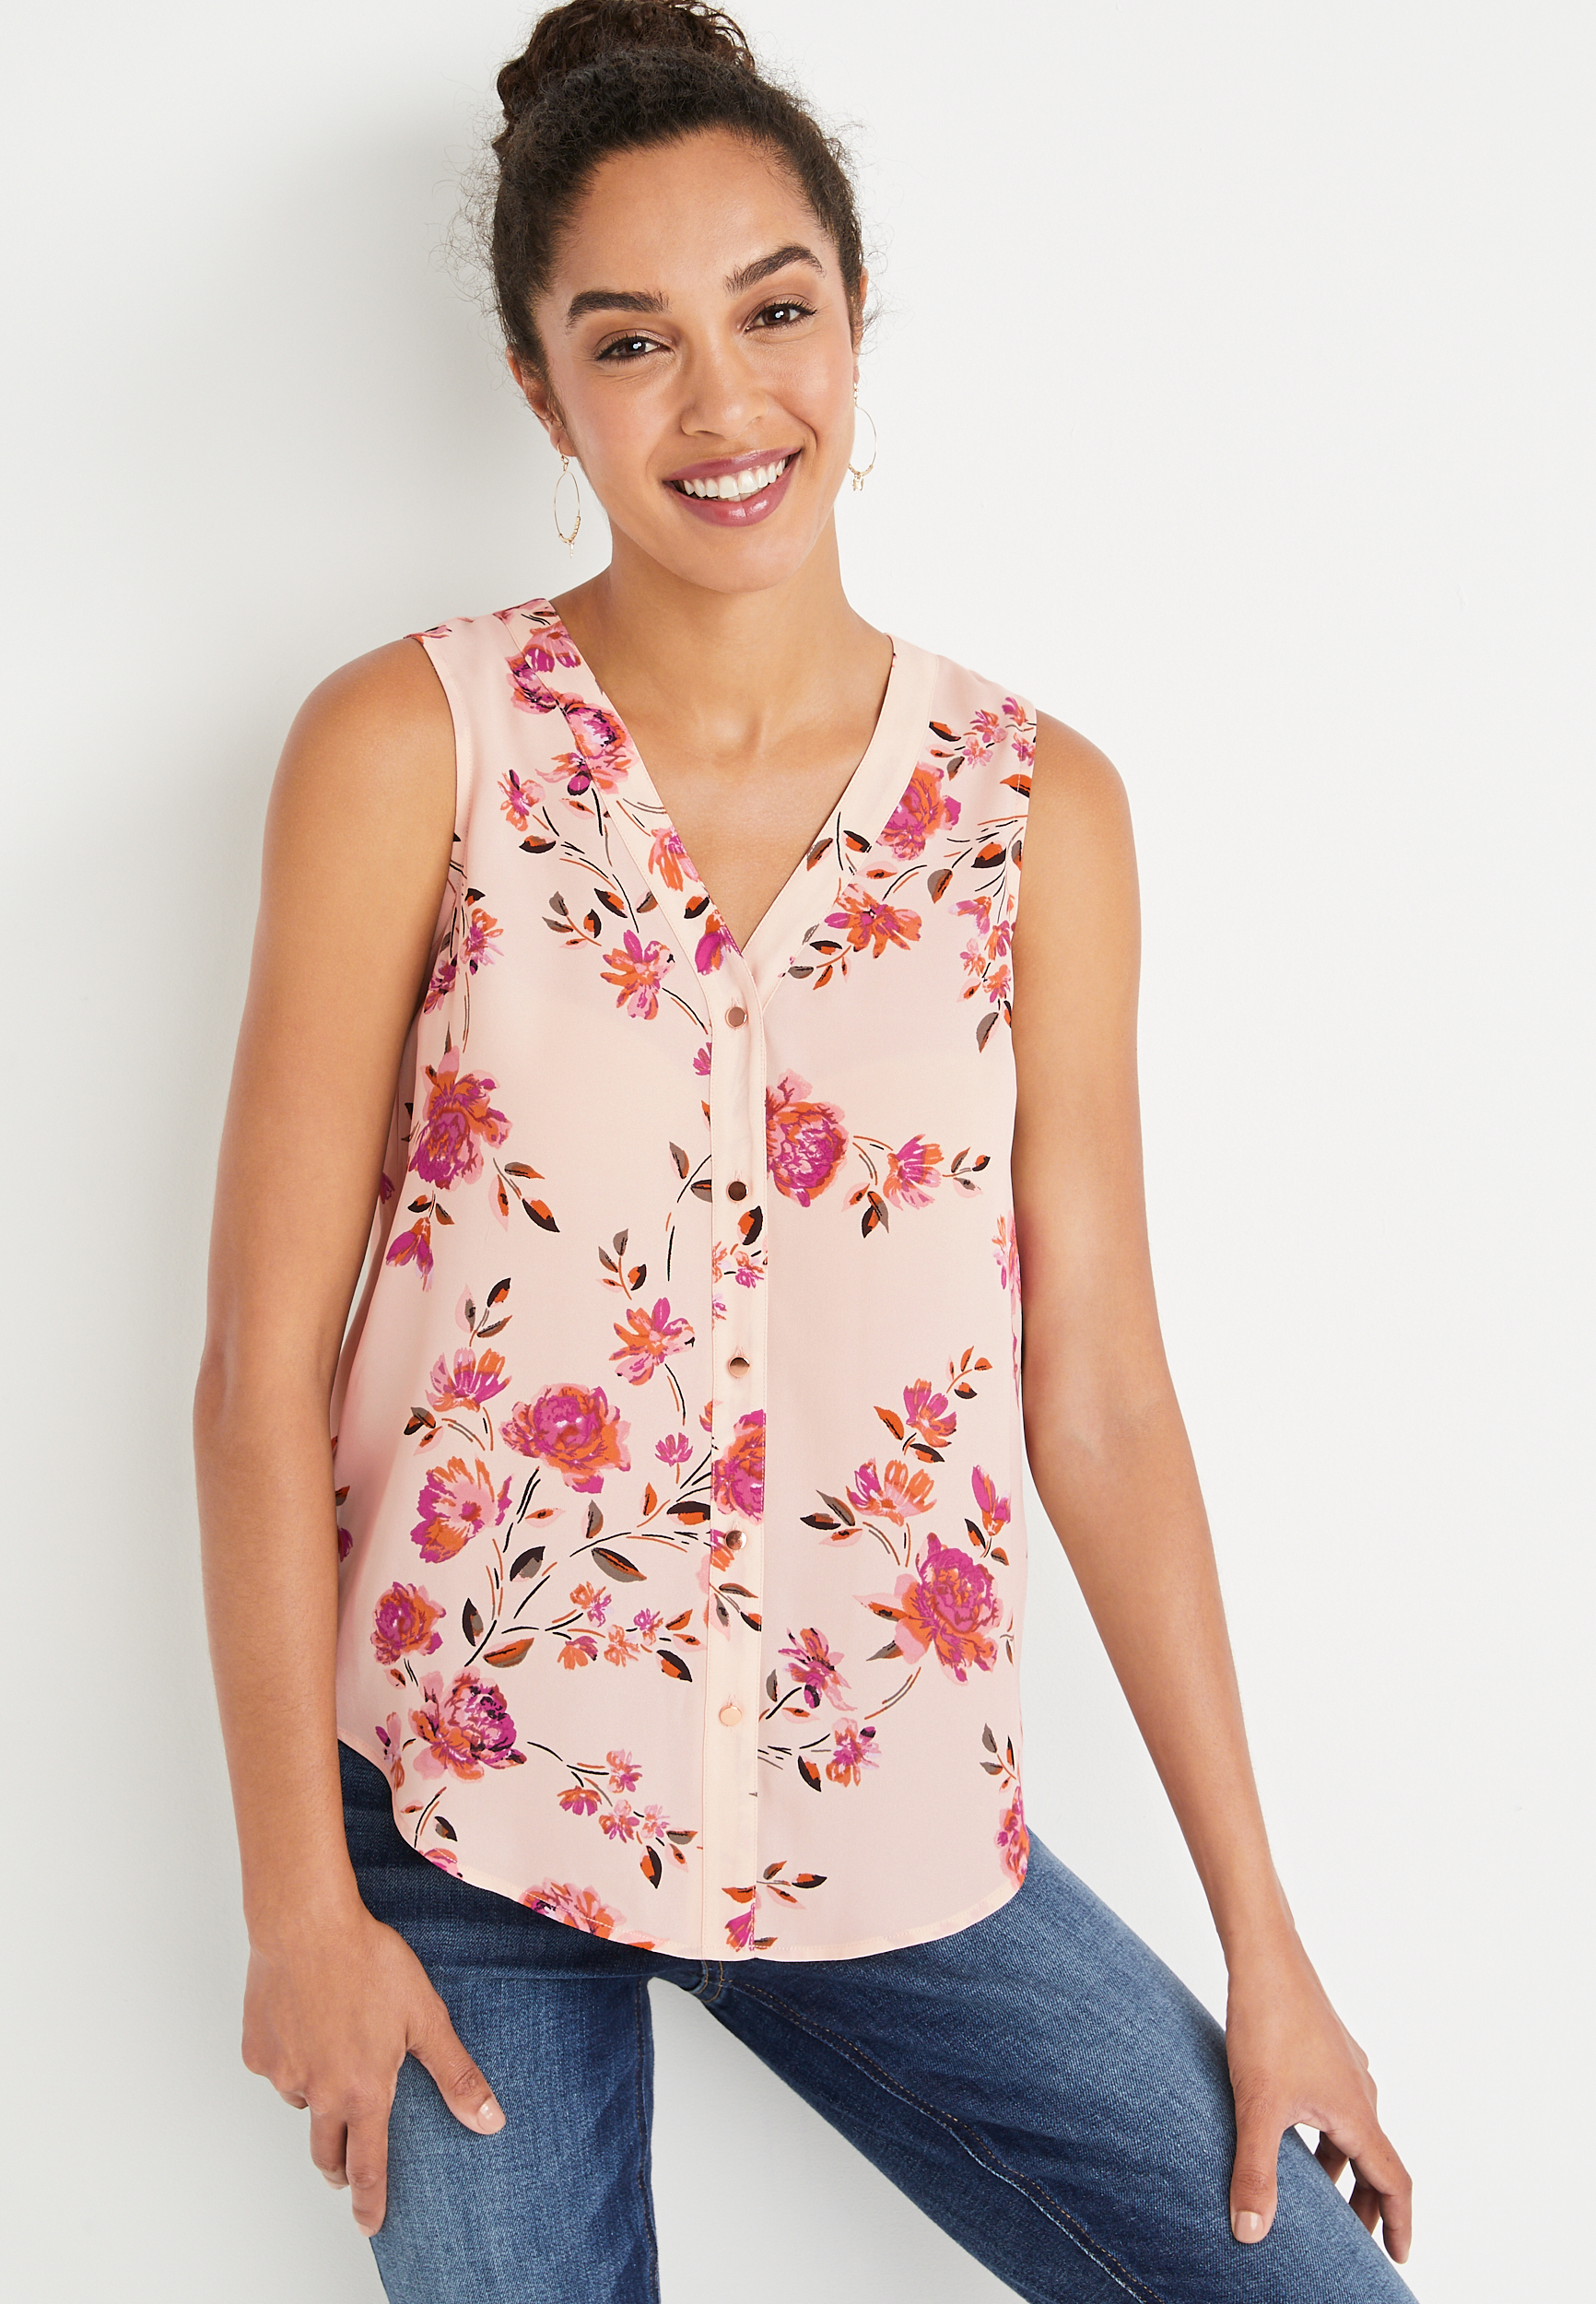 Madison Tan Floral Button Down Tan Floral Tank Top | maurices